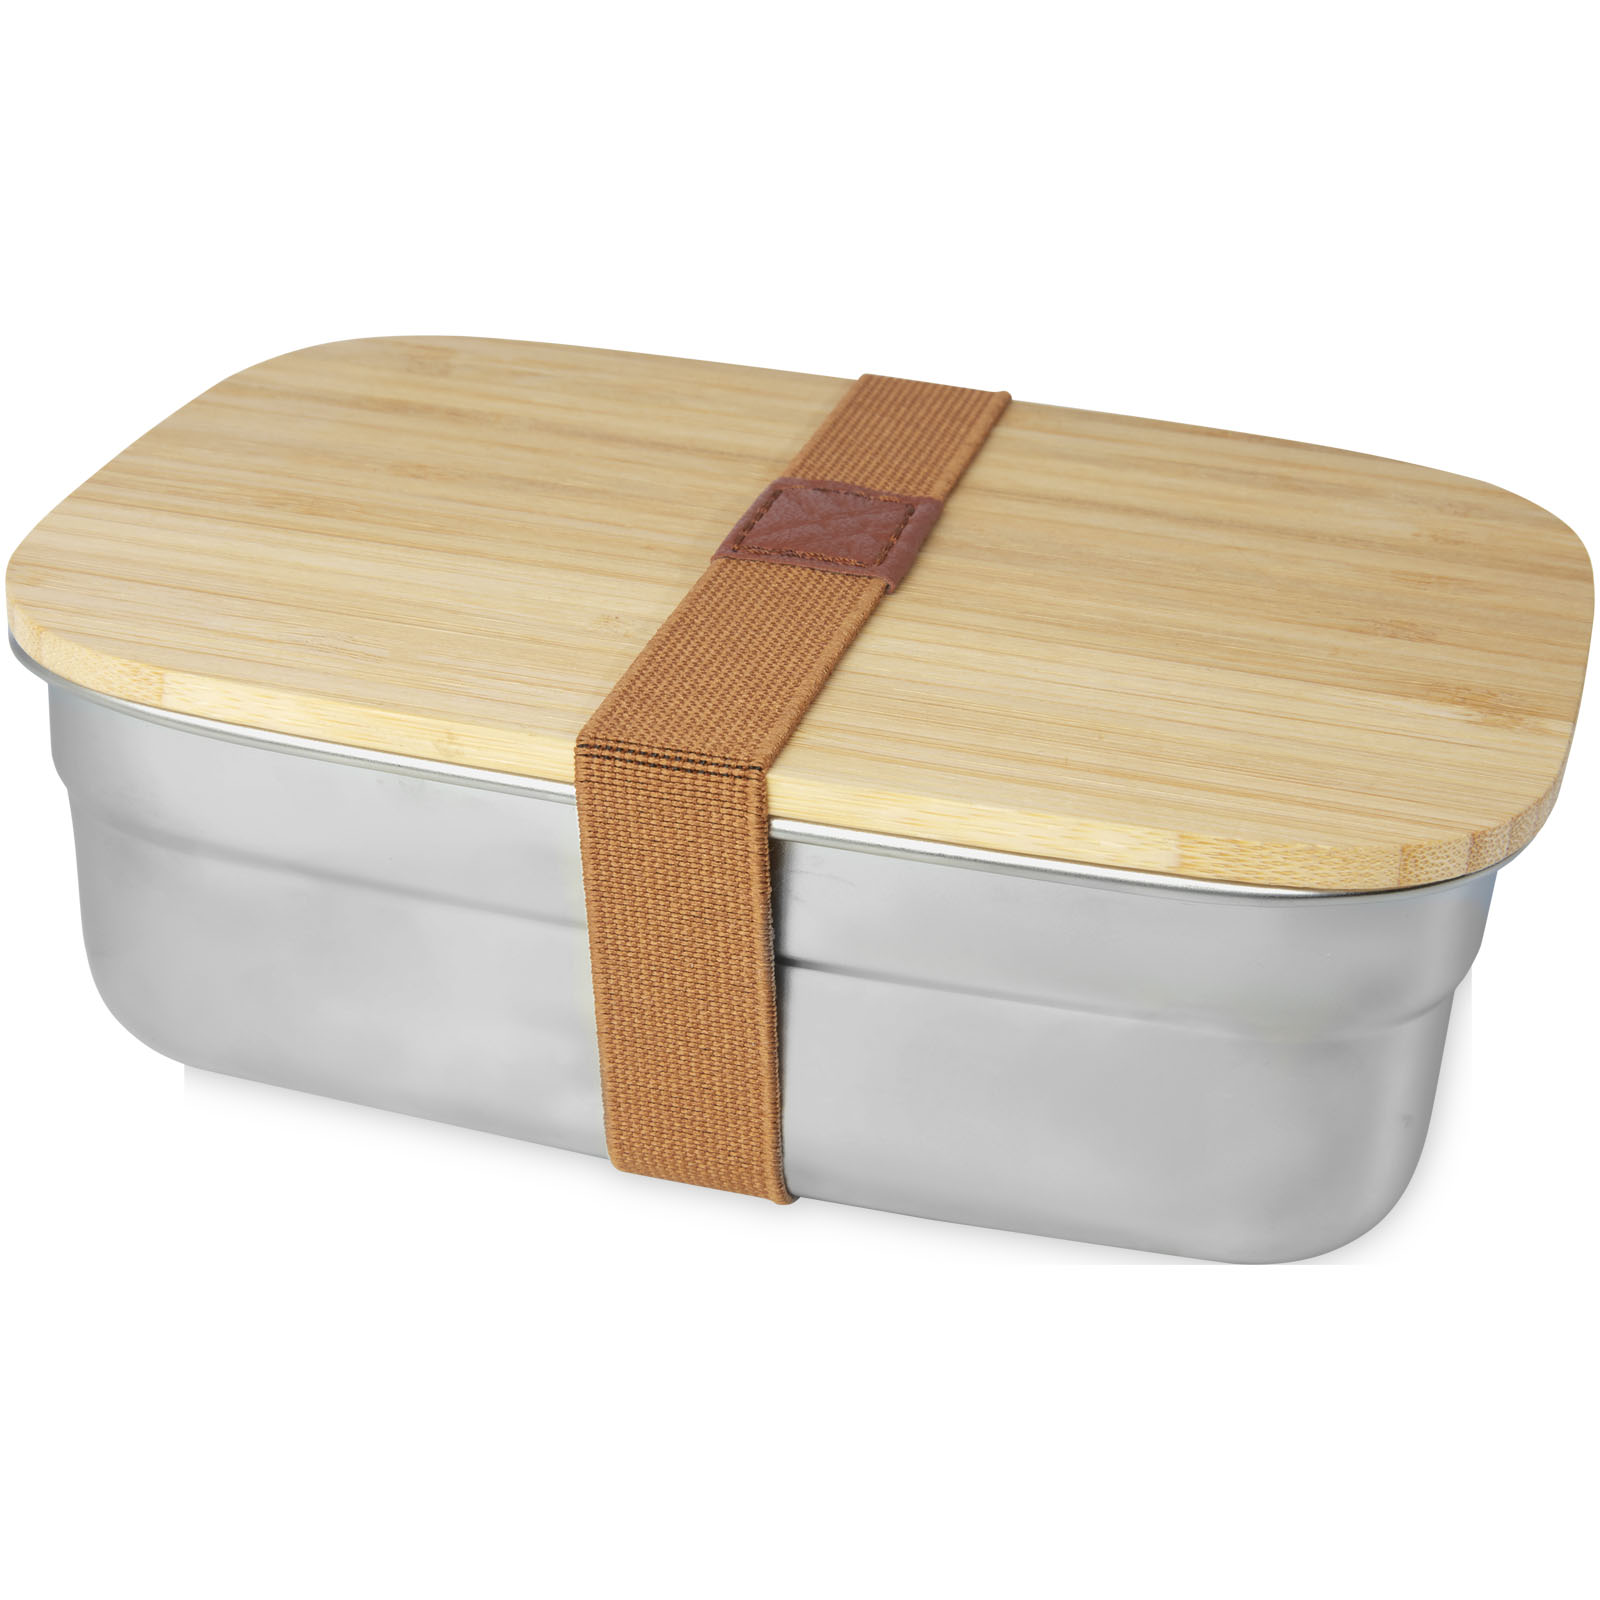 Lunch Boxes - Tite stainless steel lunch box with bamboo lid